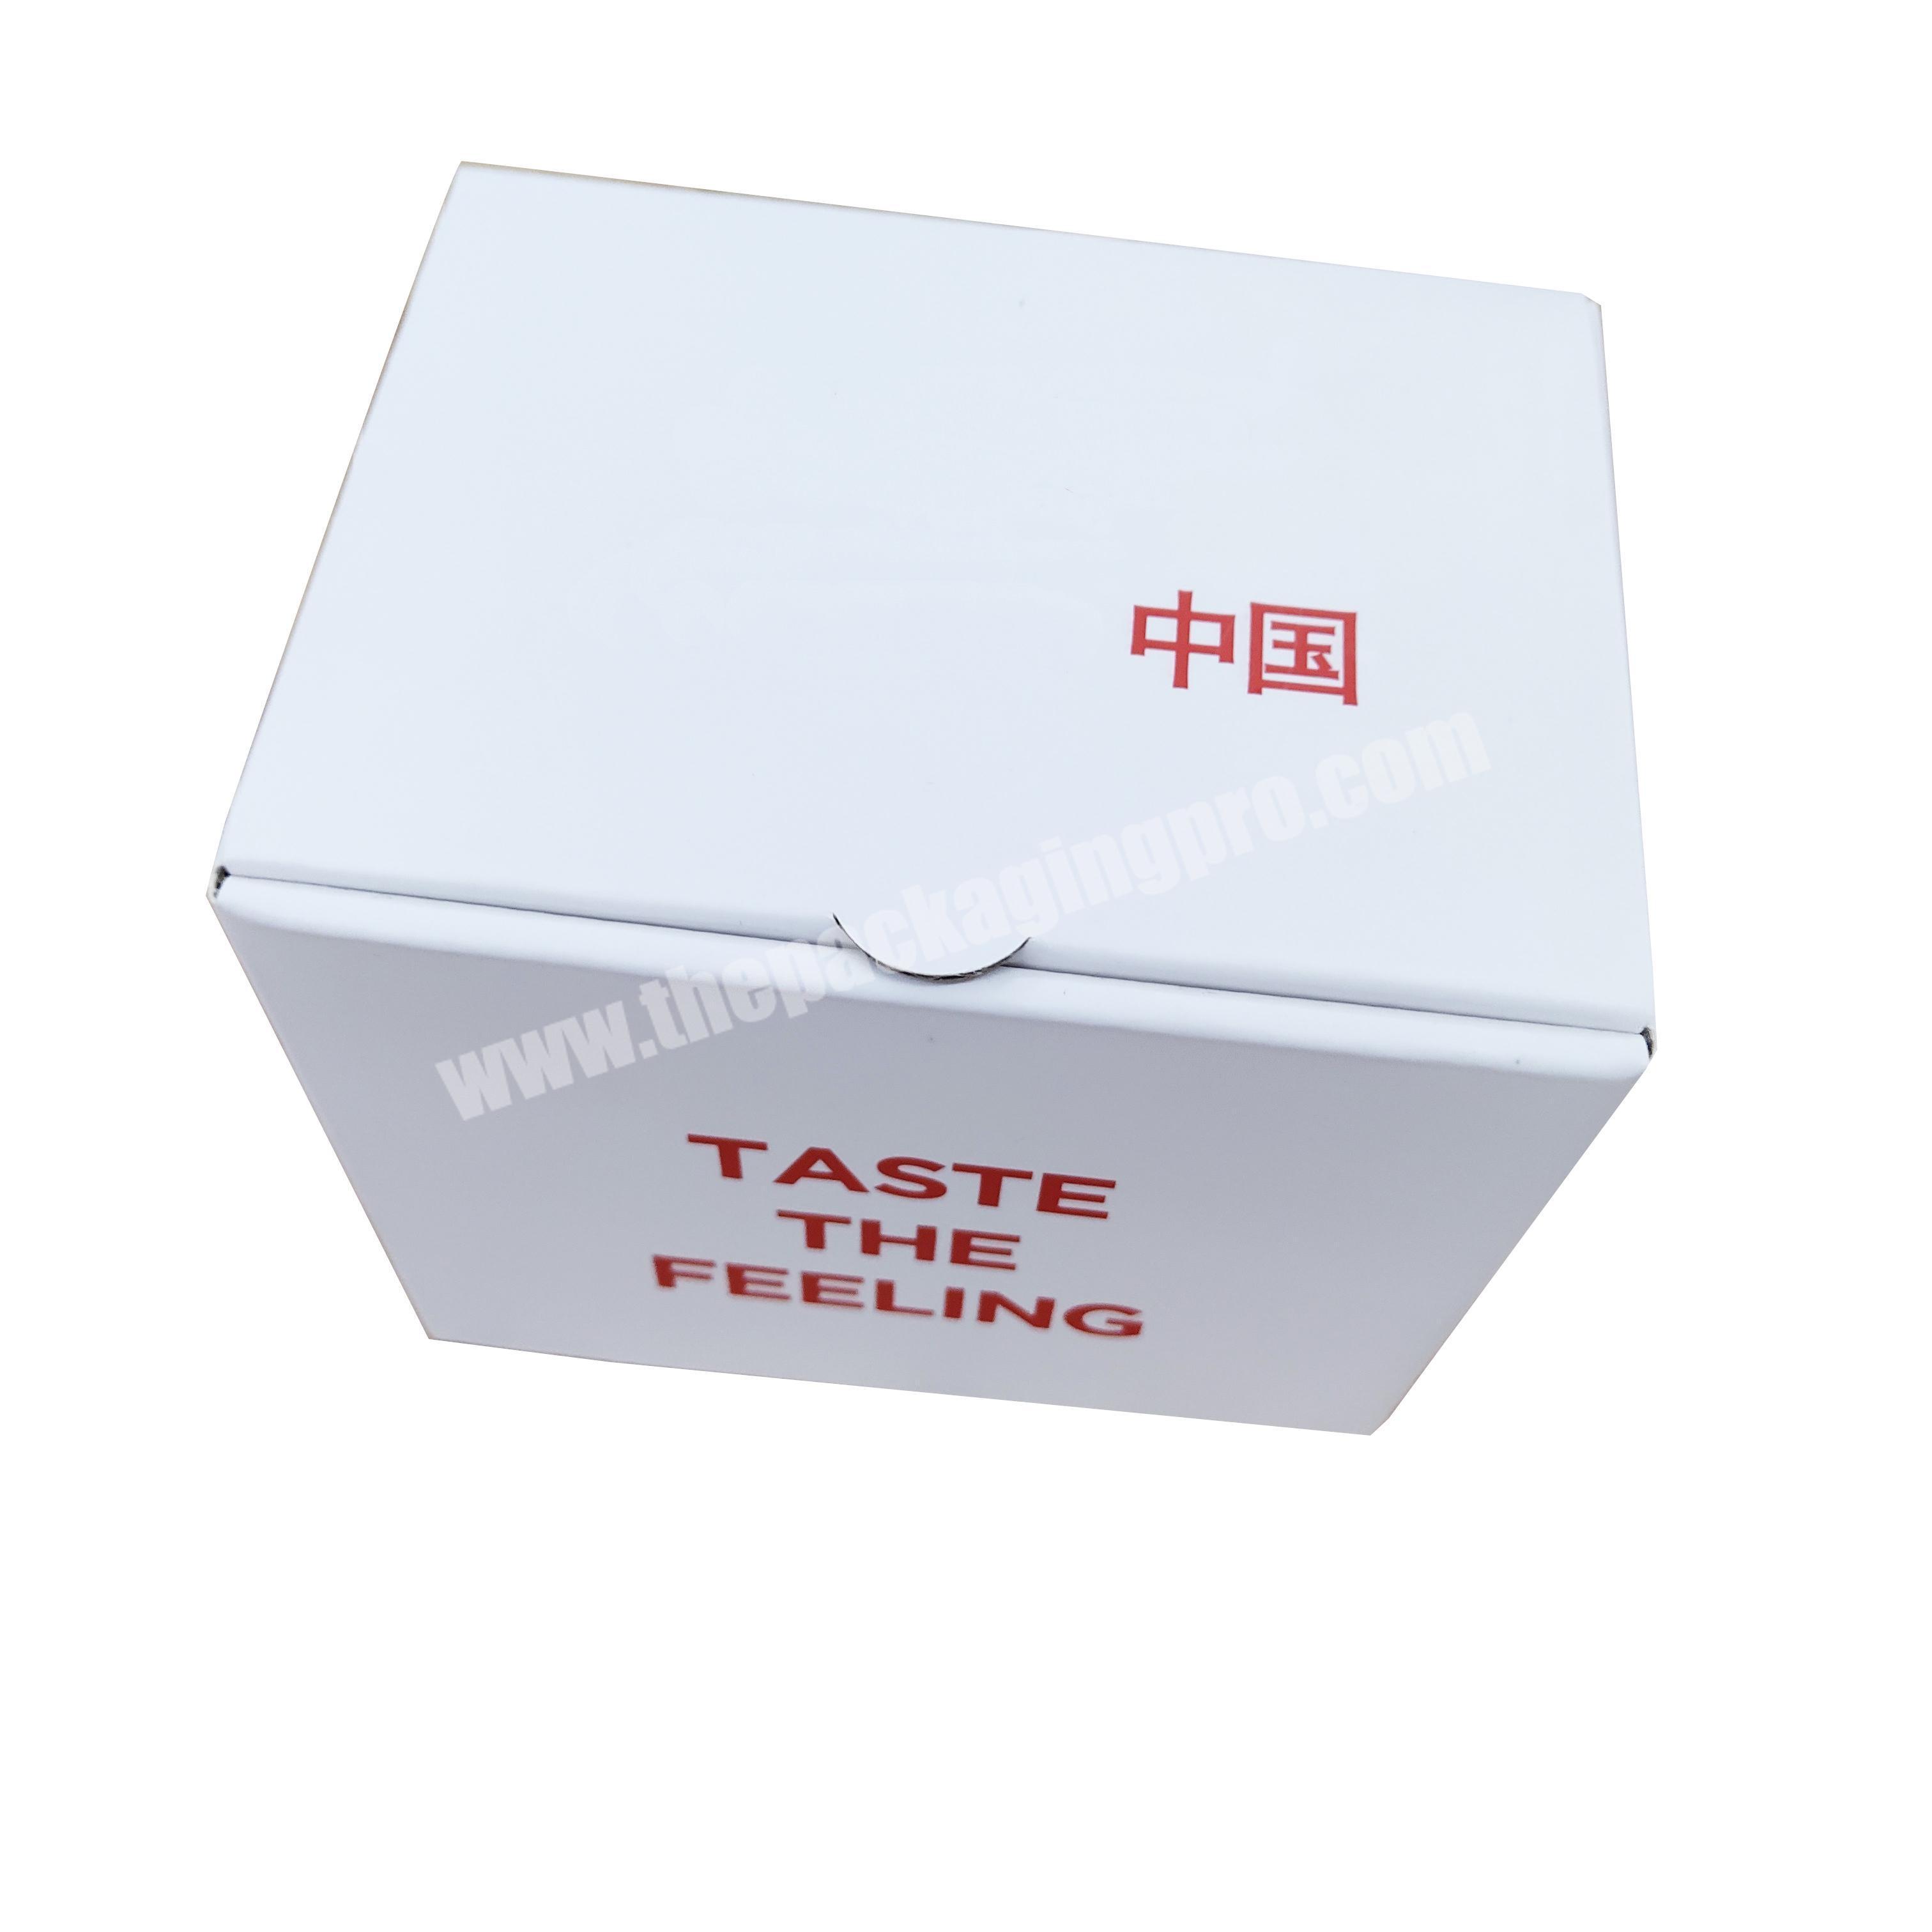 Wholesale White Printed Corrugated Cardboard Creative Paper Carton Packaging Box For Mug Shipping Cups